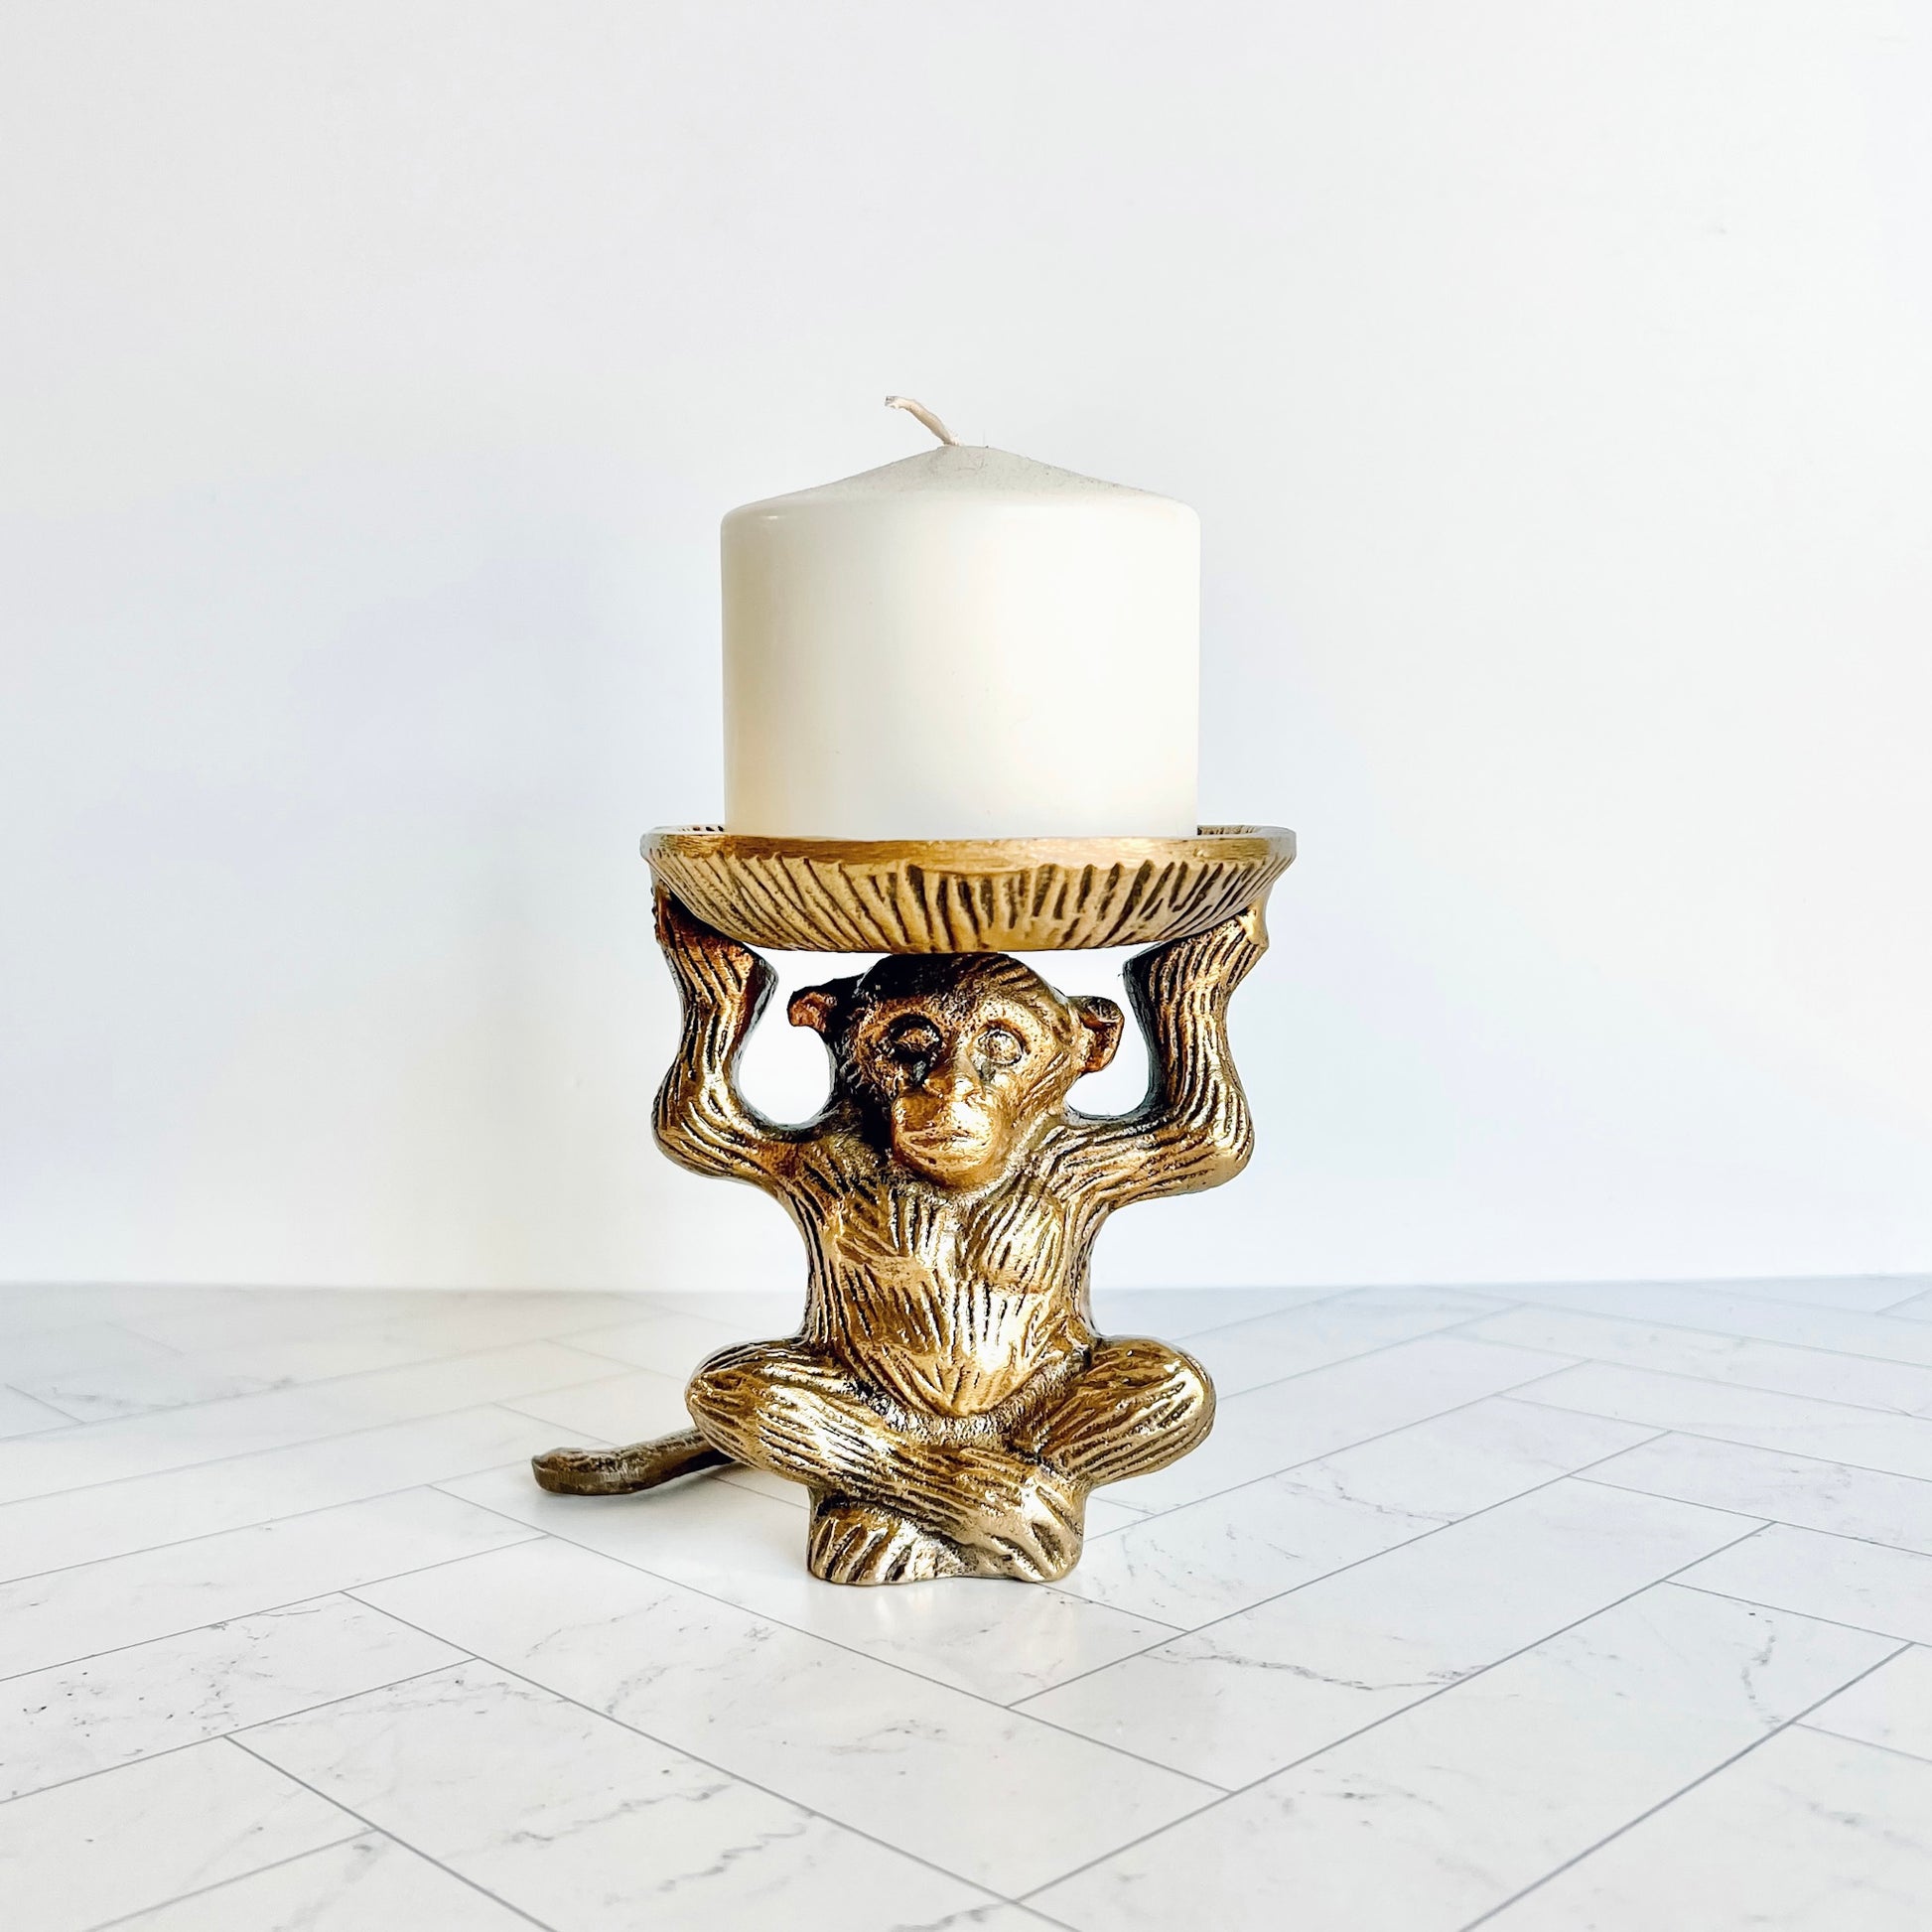 The brass animal figurine shown holding a pillar candle